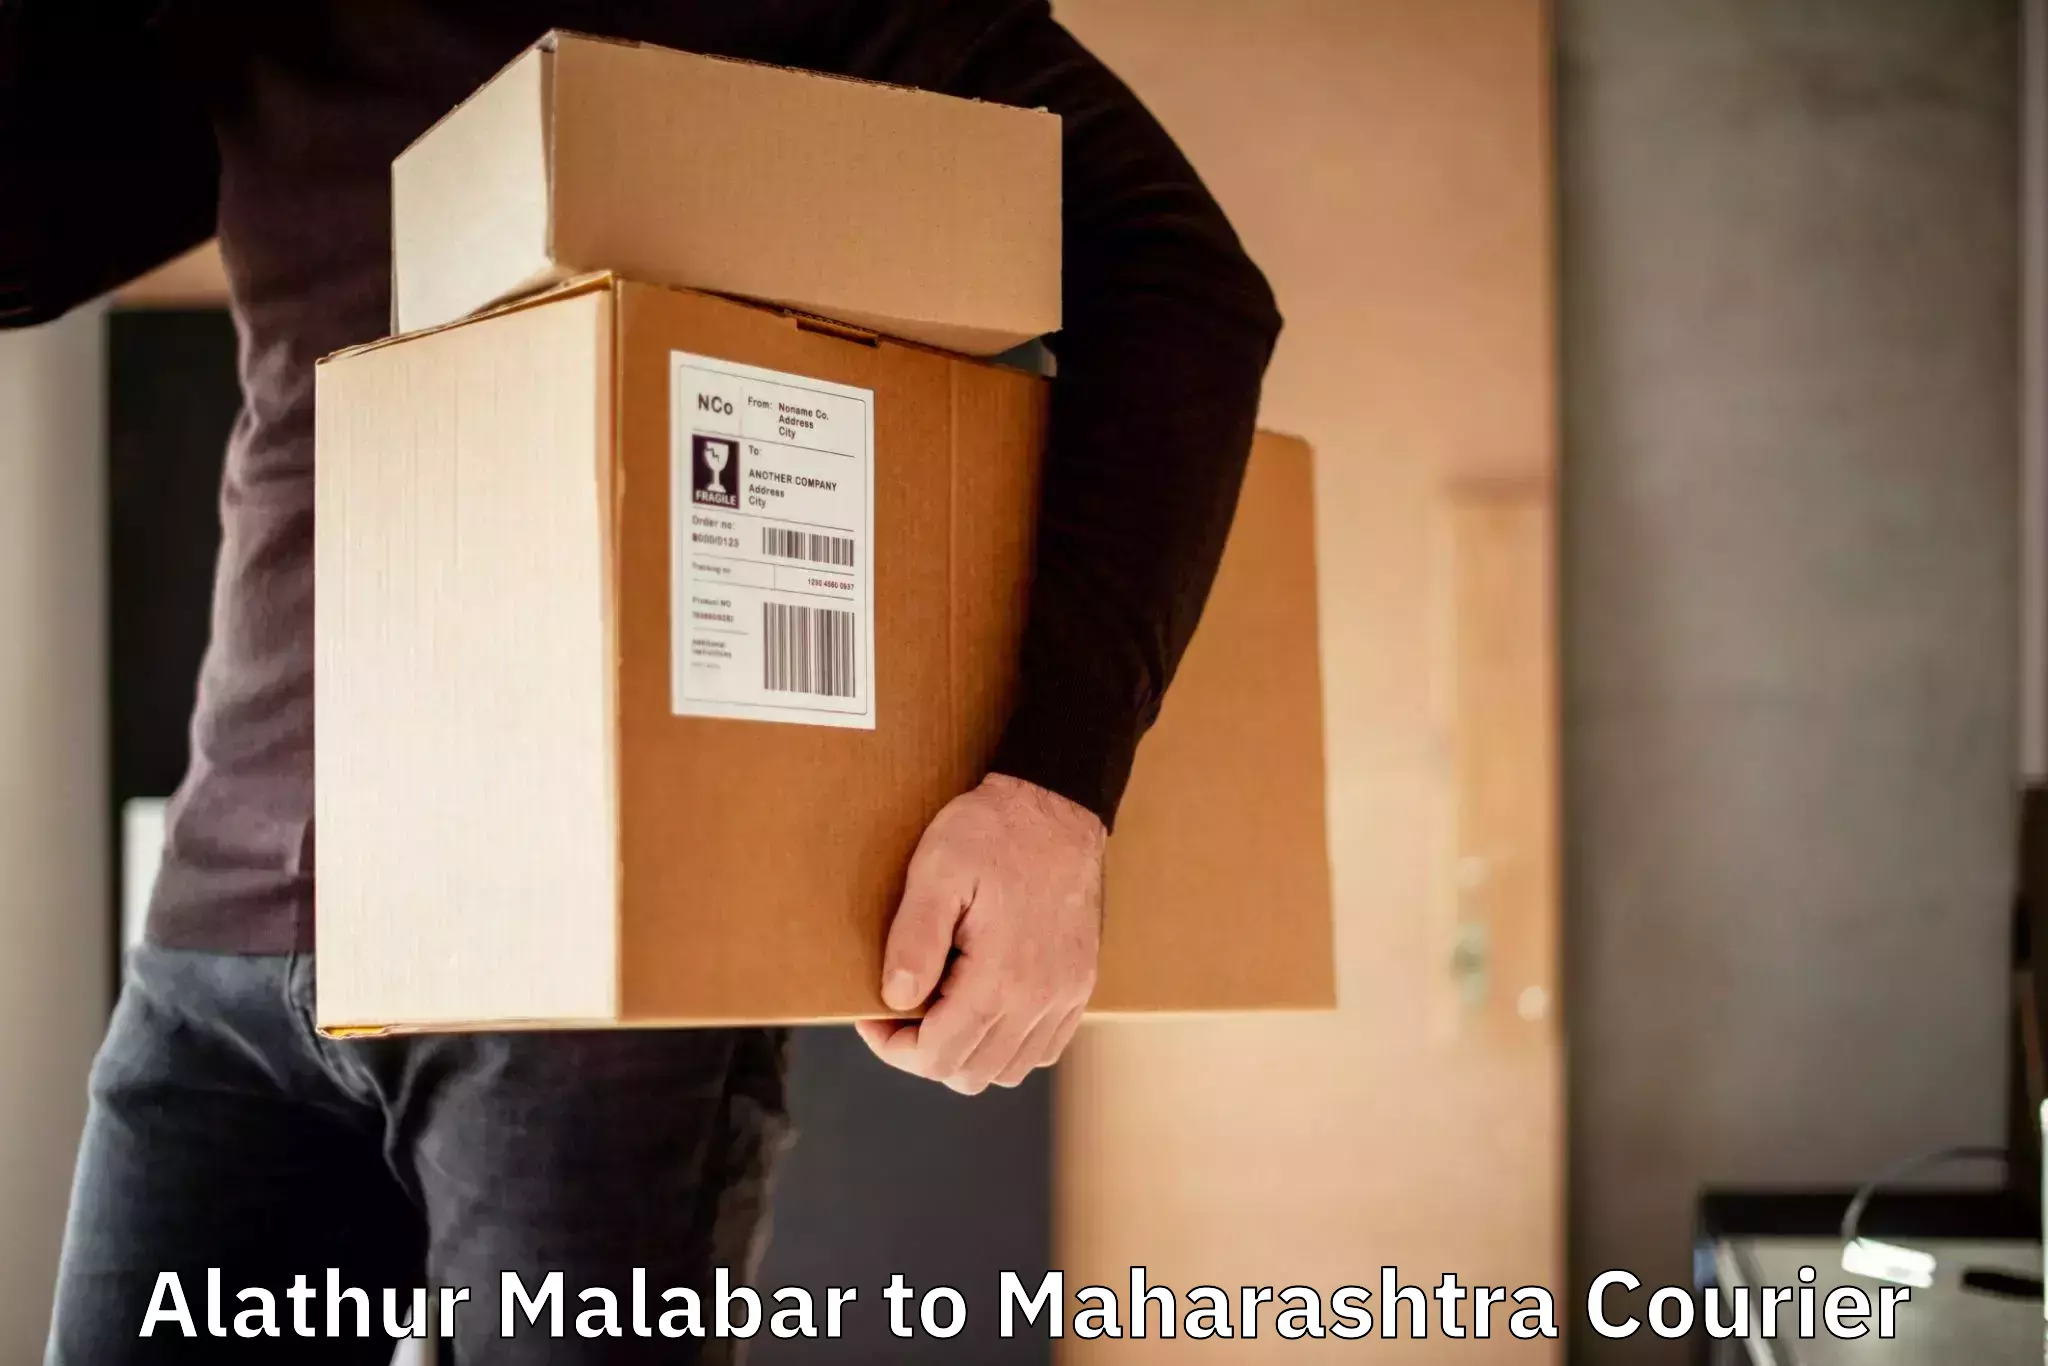 Flexible delivery schedules Alathur Malabar to Parbhani